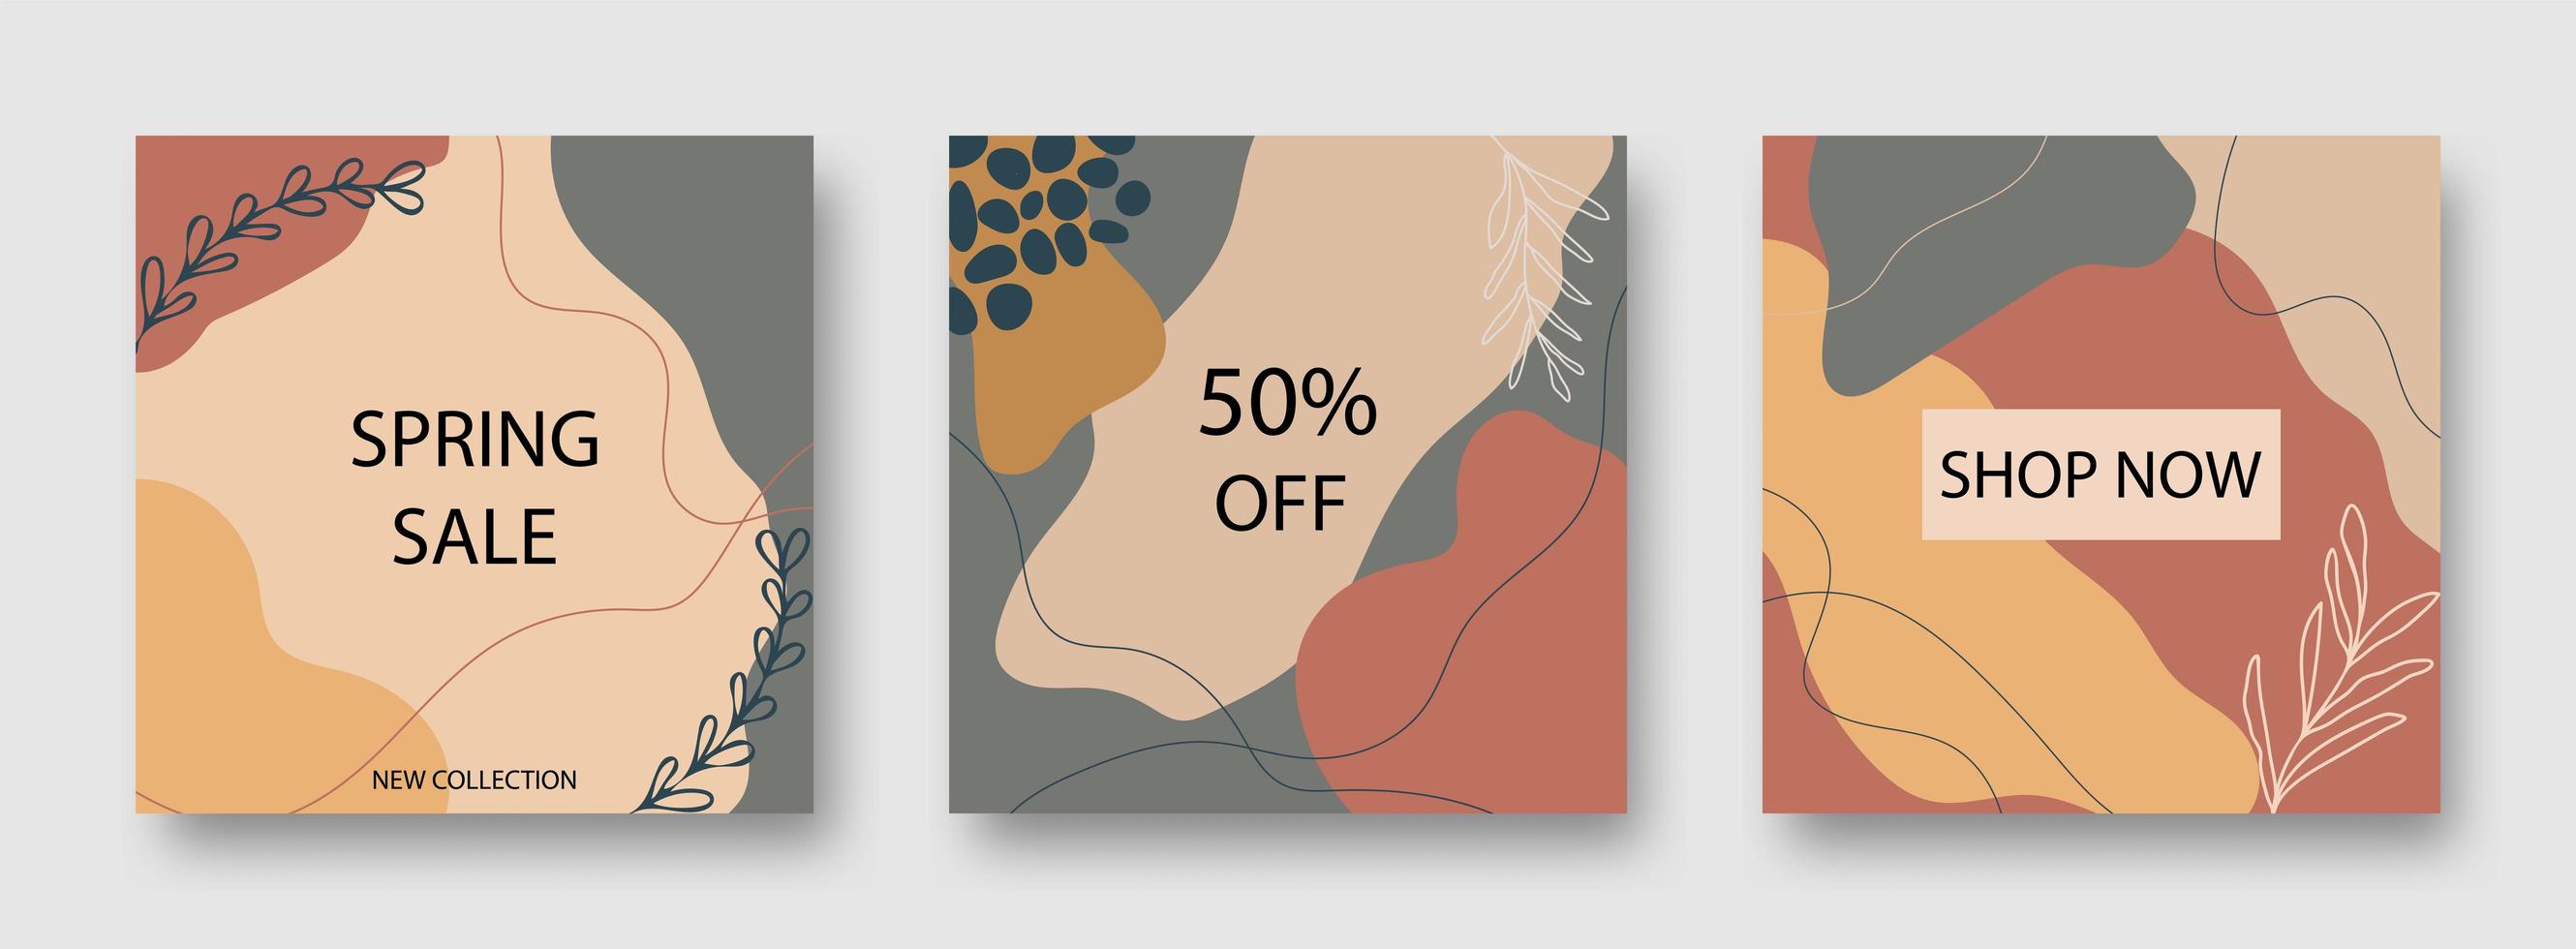 Brown and gray abstract shape sale banner set vector